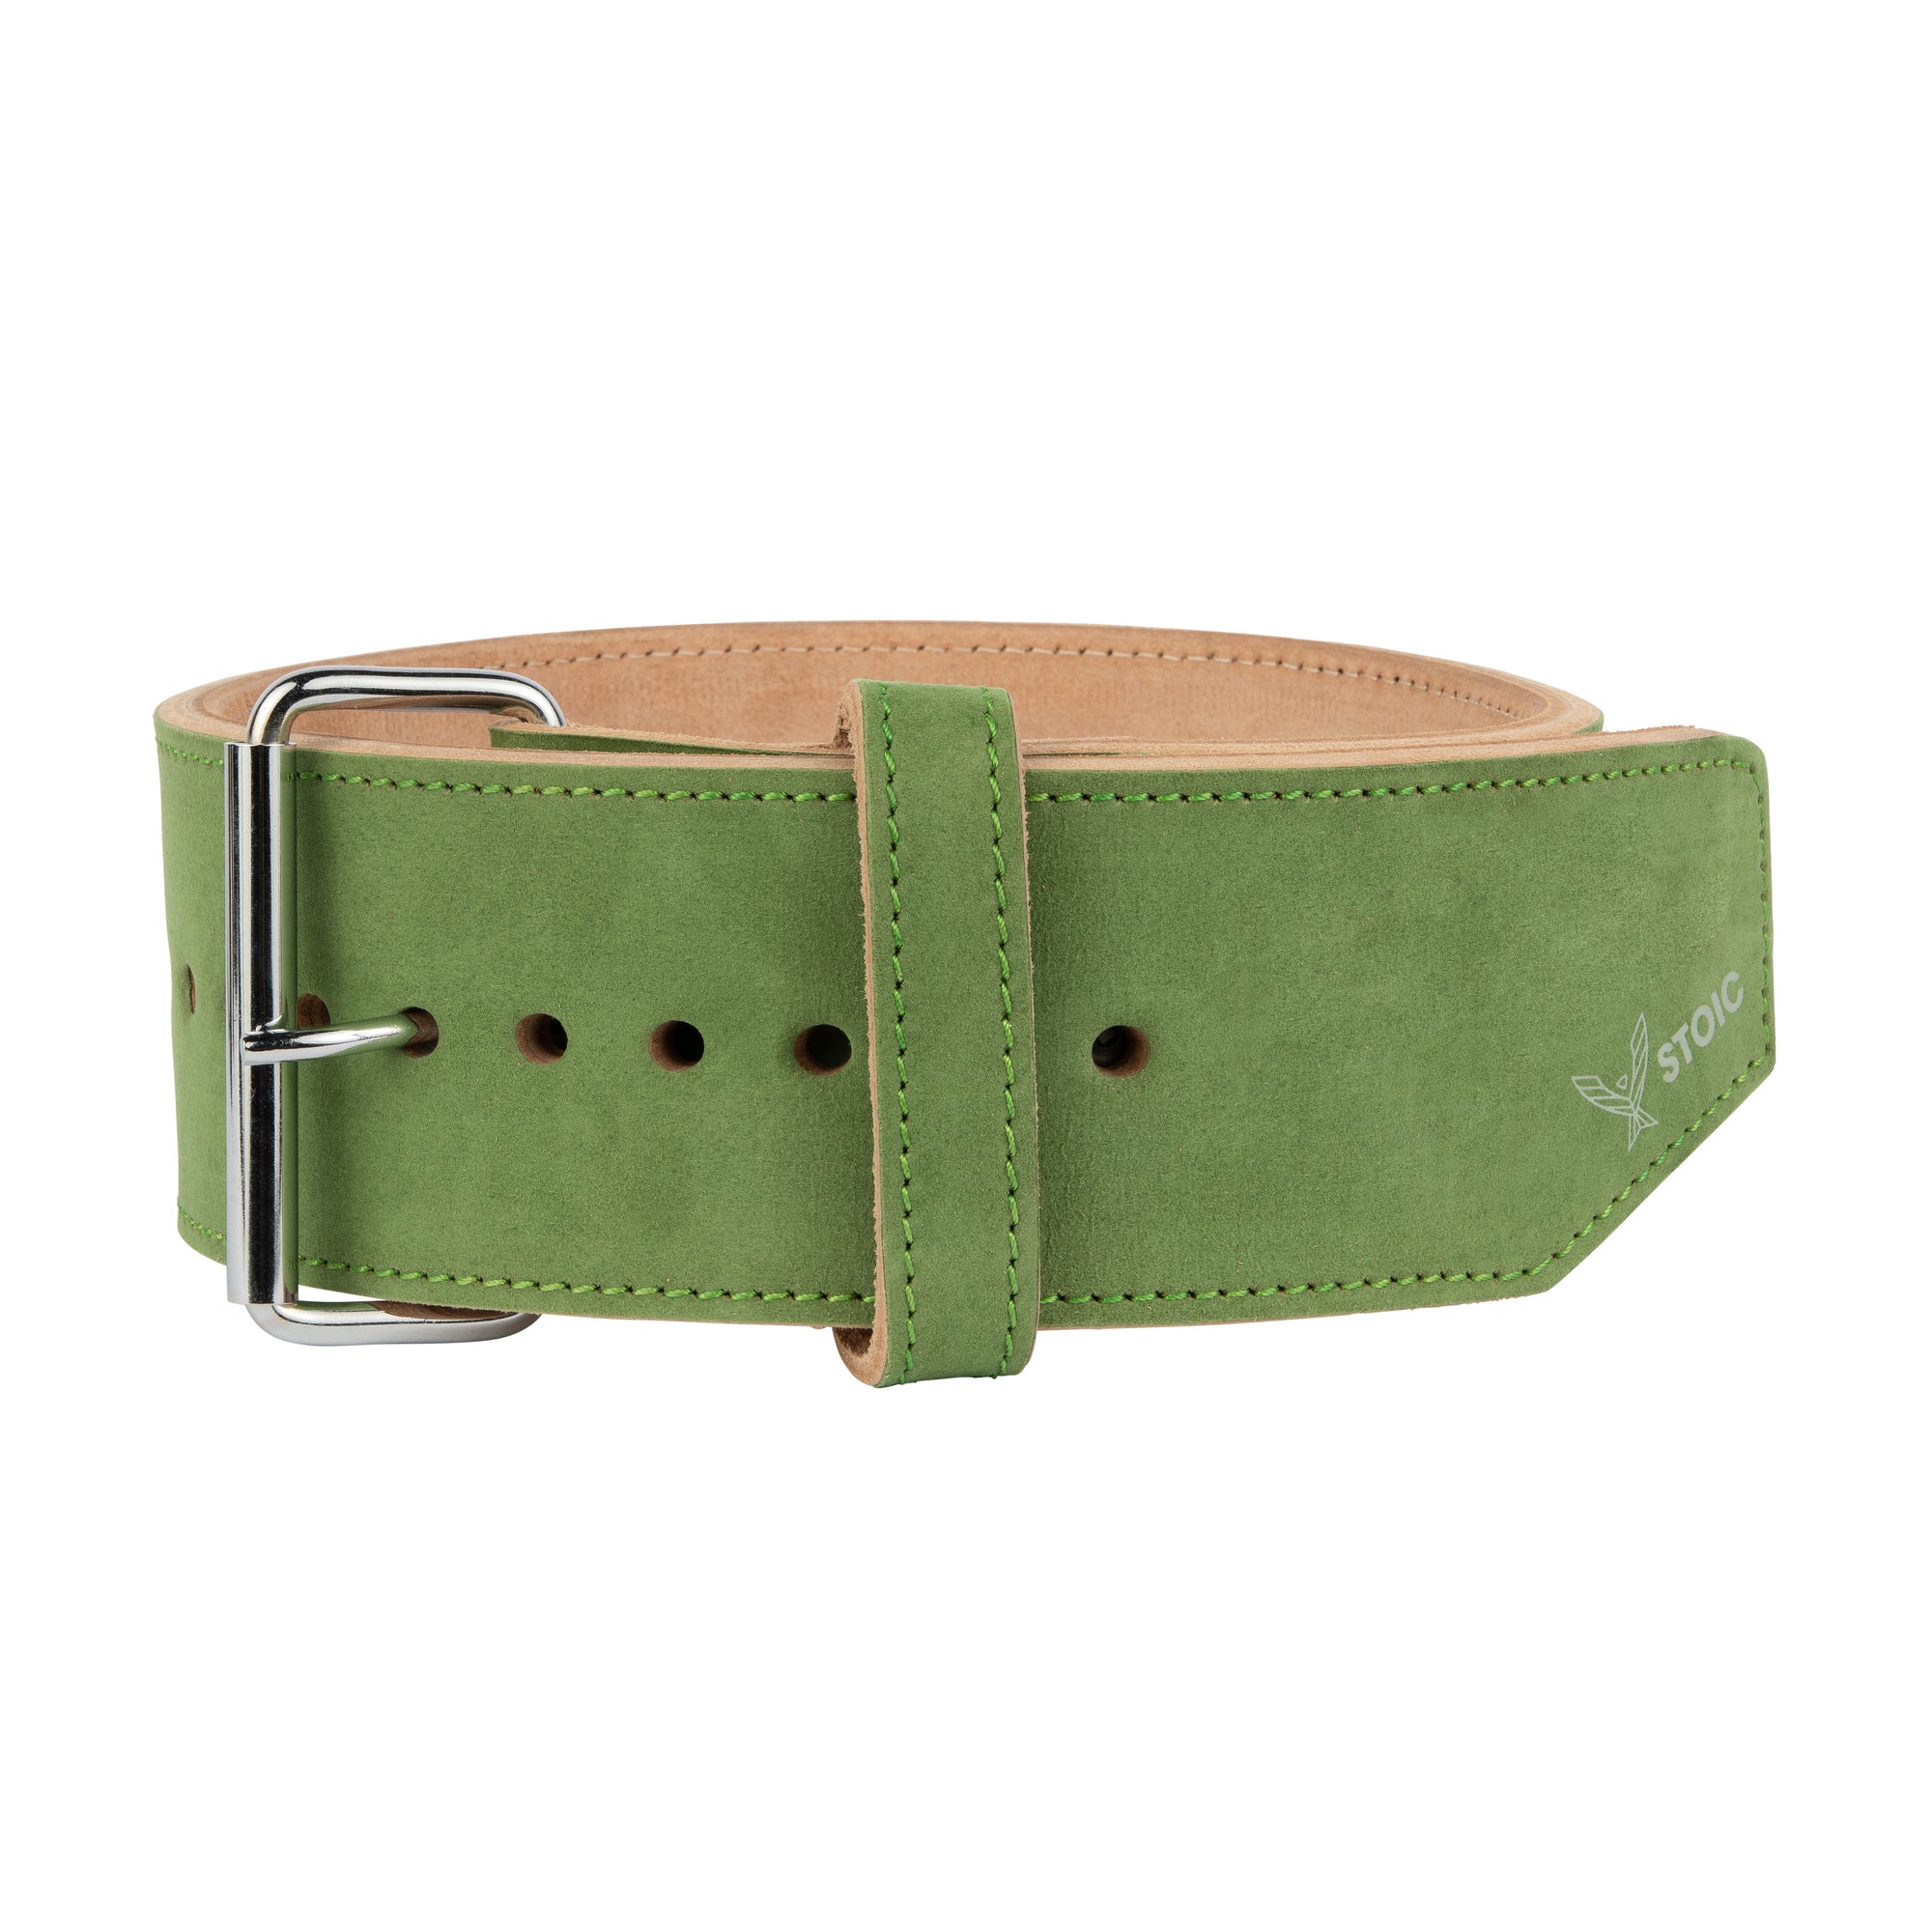 Stoic Powerlifting Prong Belt (10mm) - Olive Drab